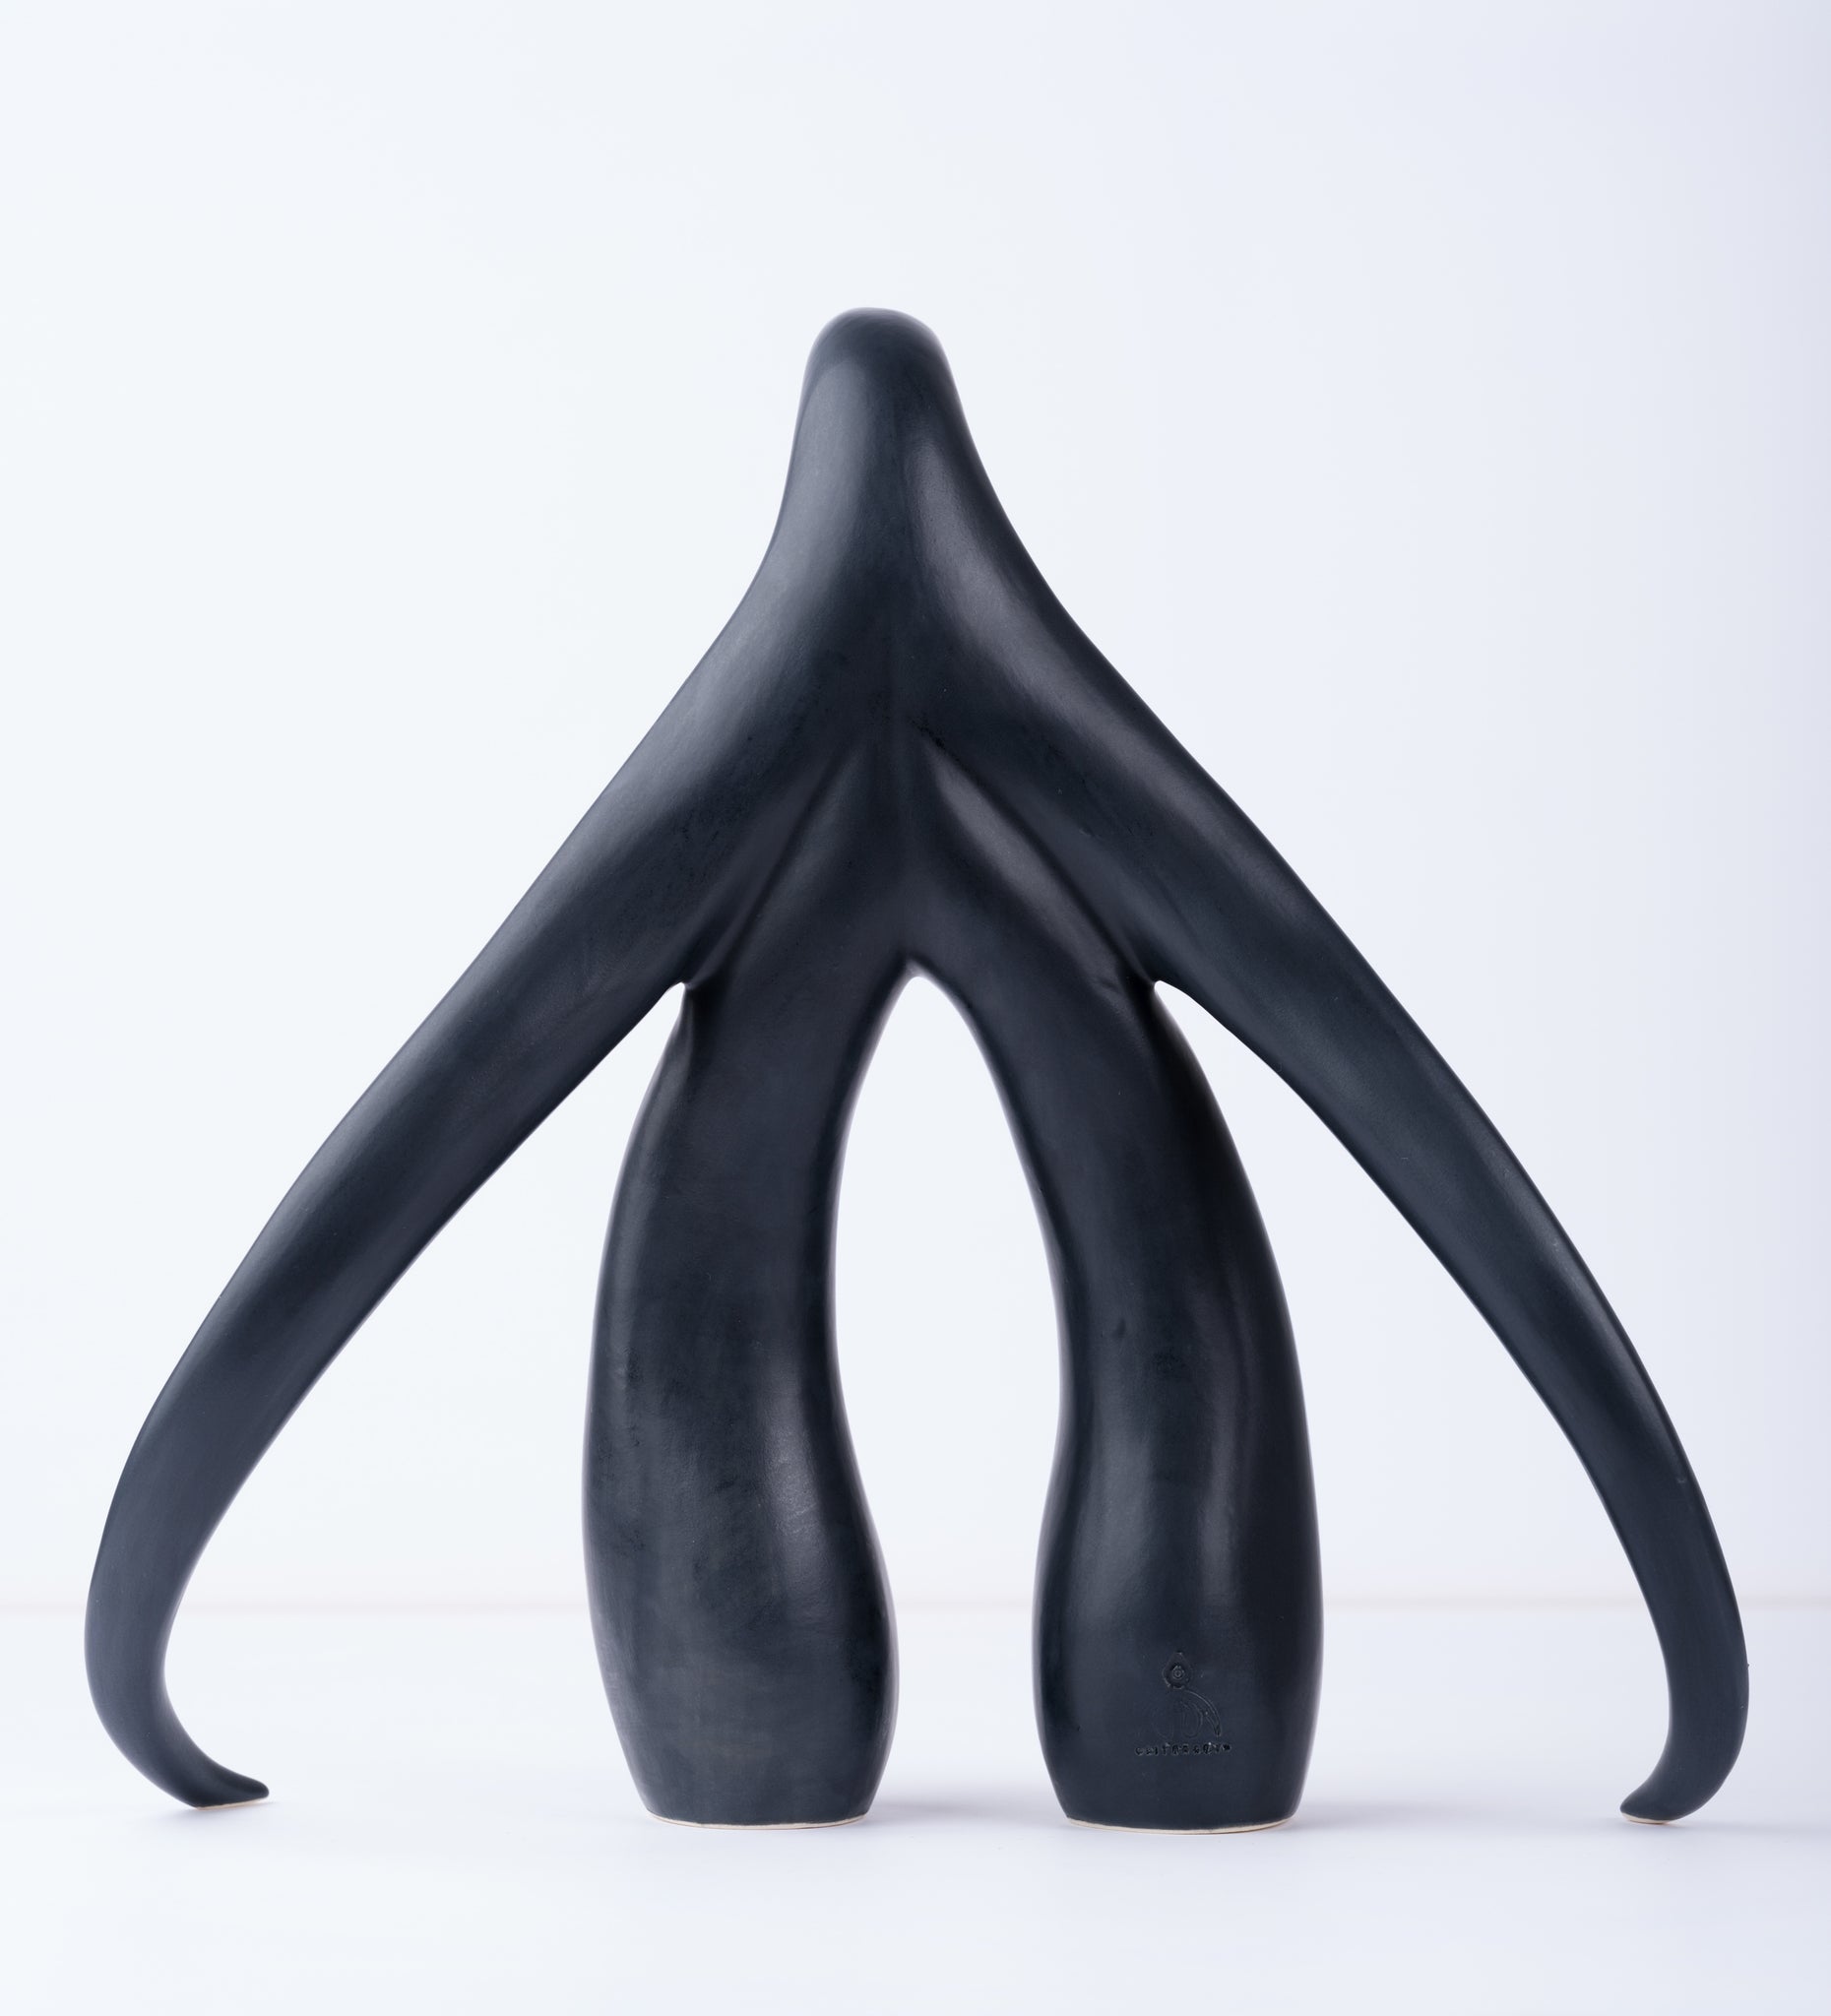 Back view of "Swan Series" ceramic sculpture in matte black by Sophia Wallace, 2022.